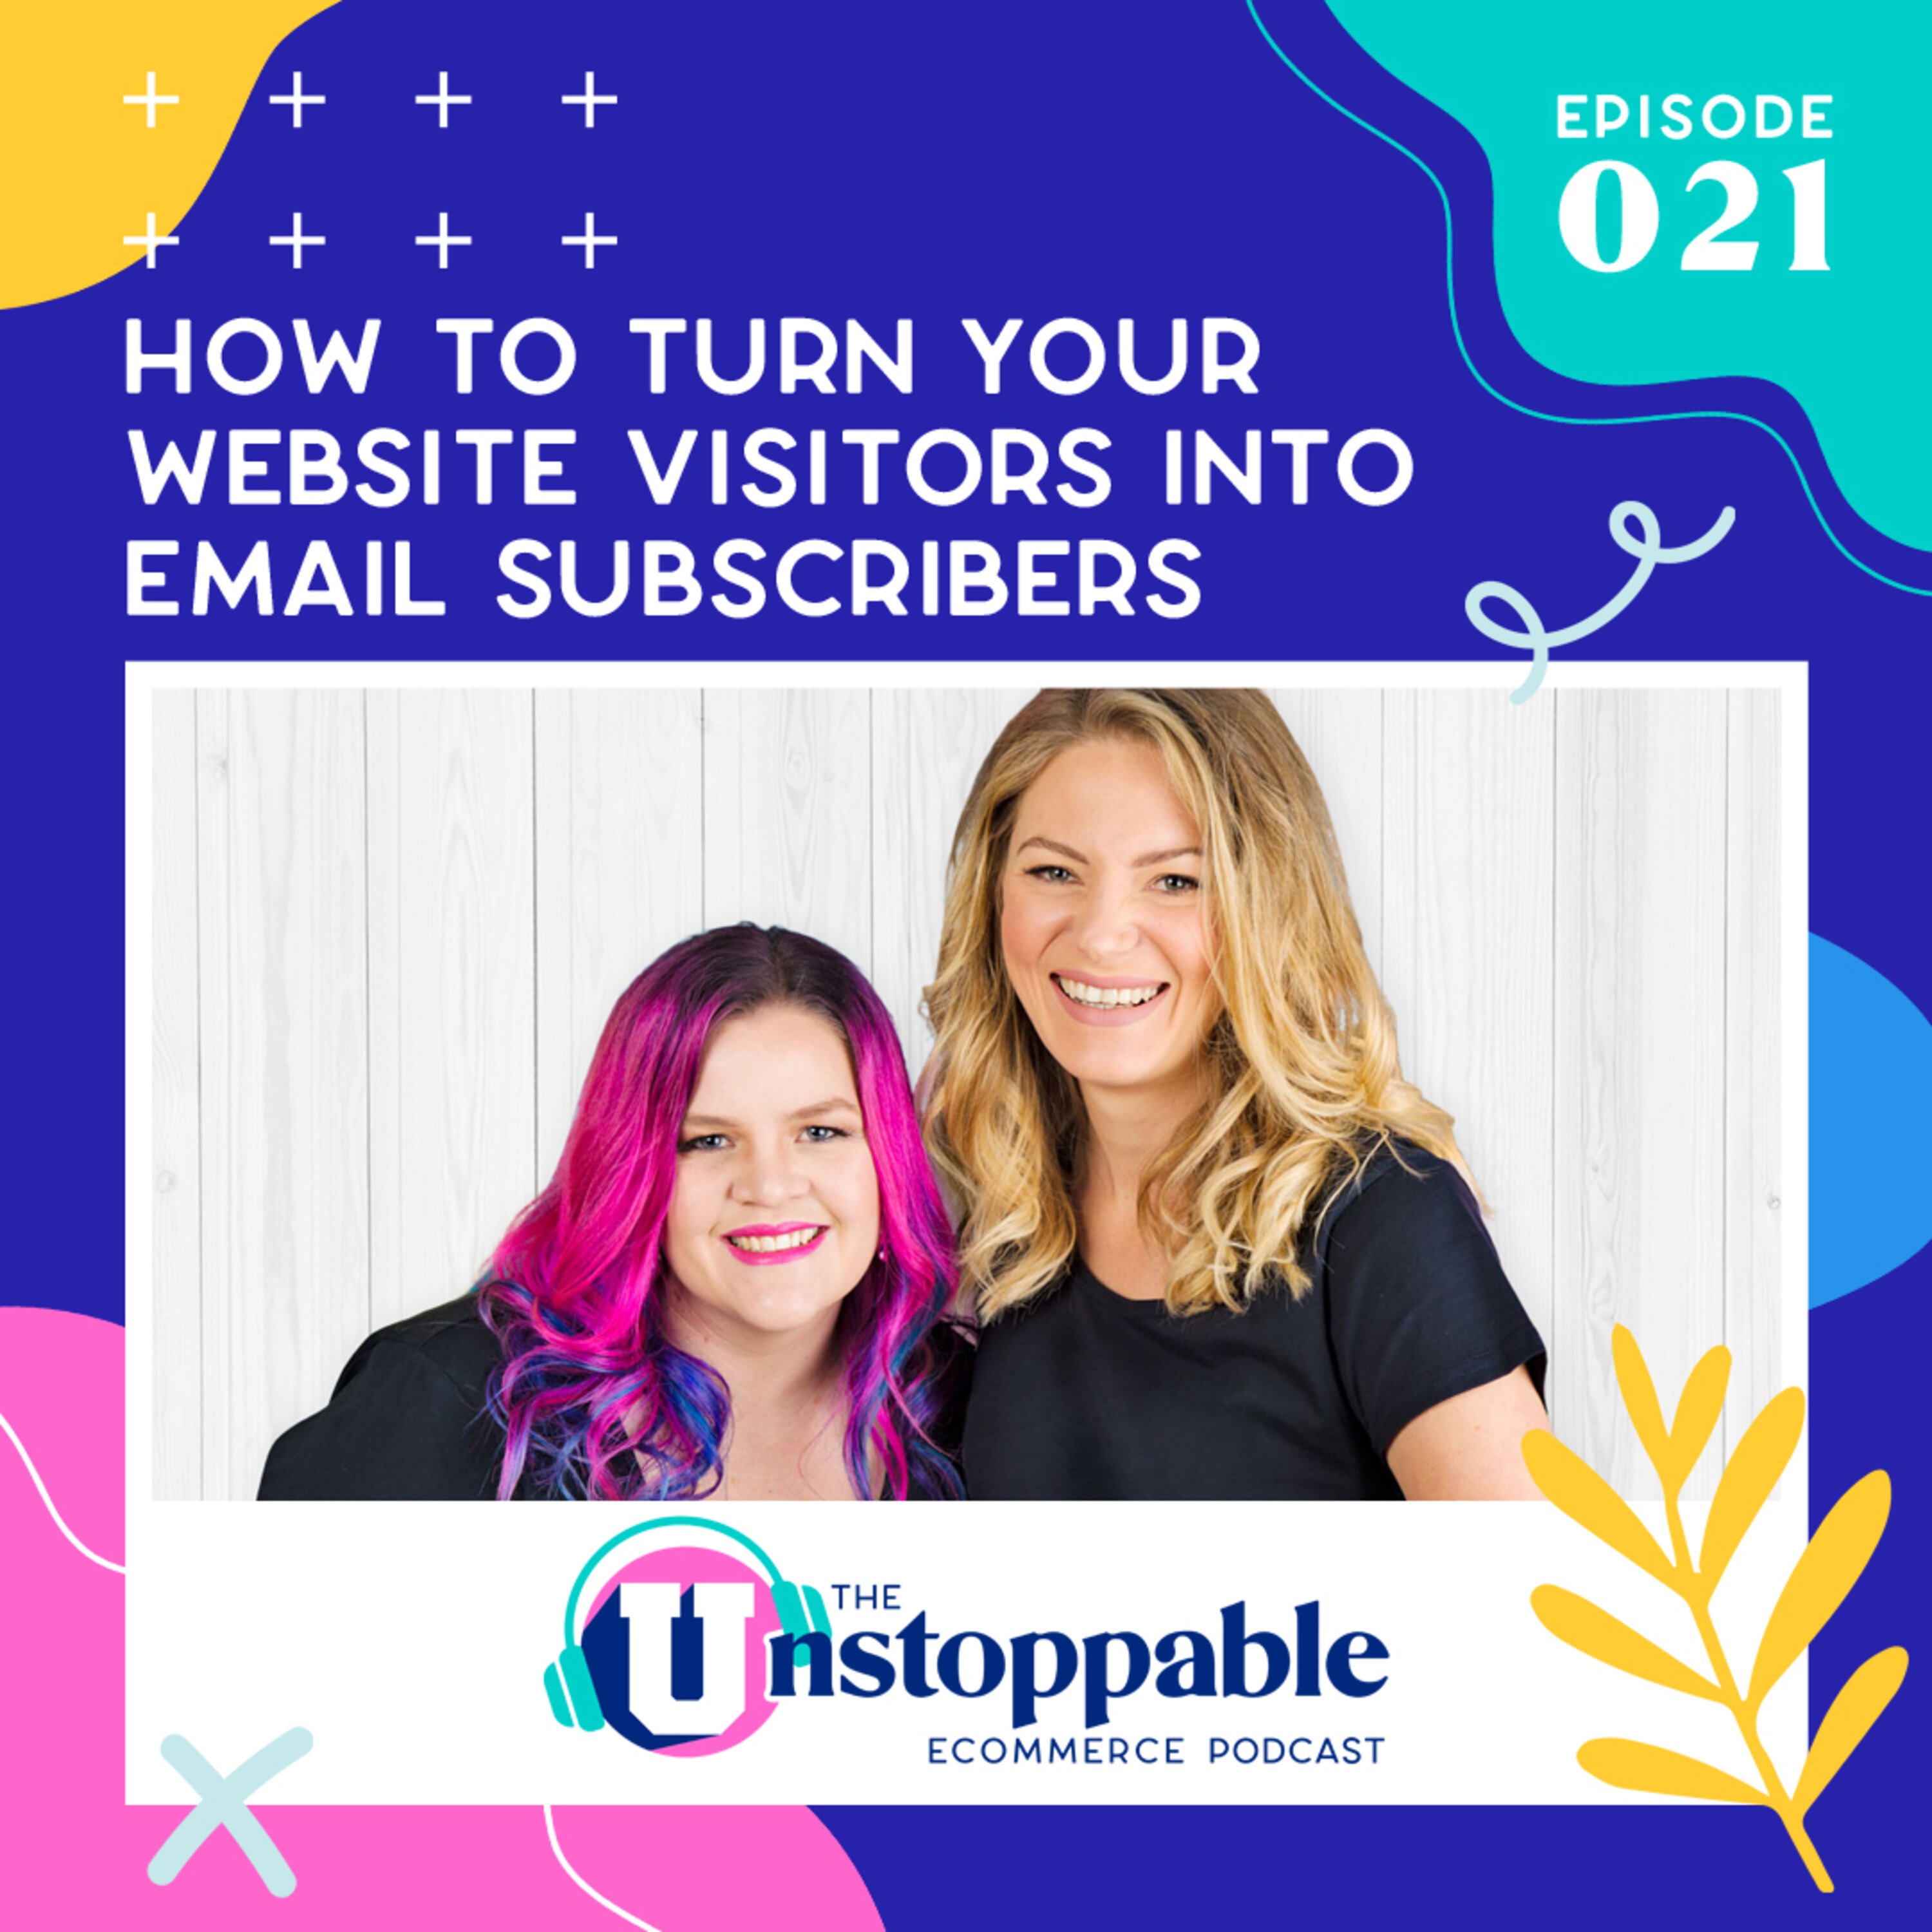 How to Turn Your Website Visitors into Email Subscribers